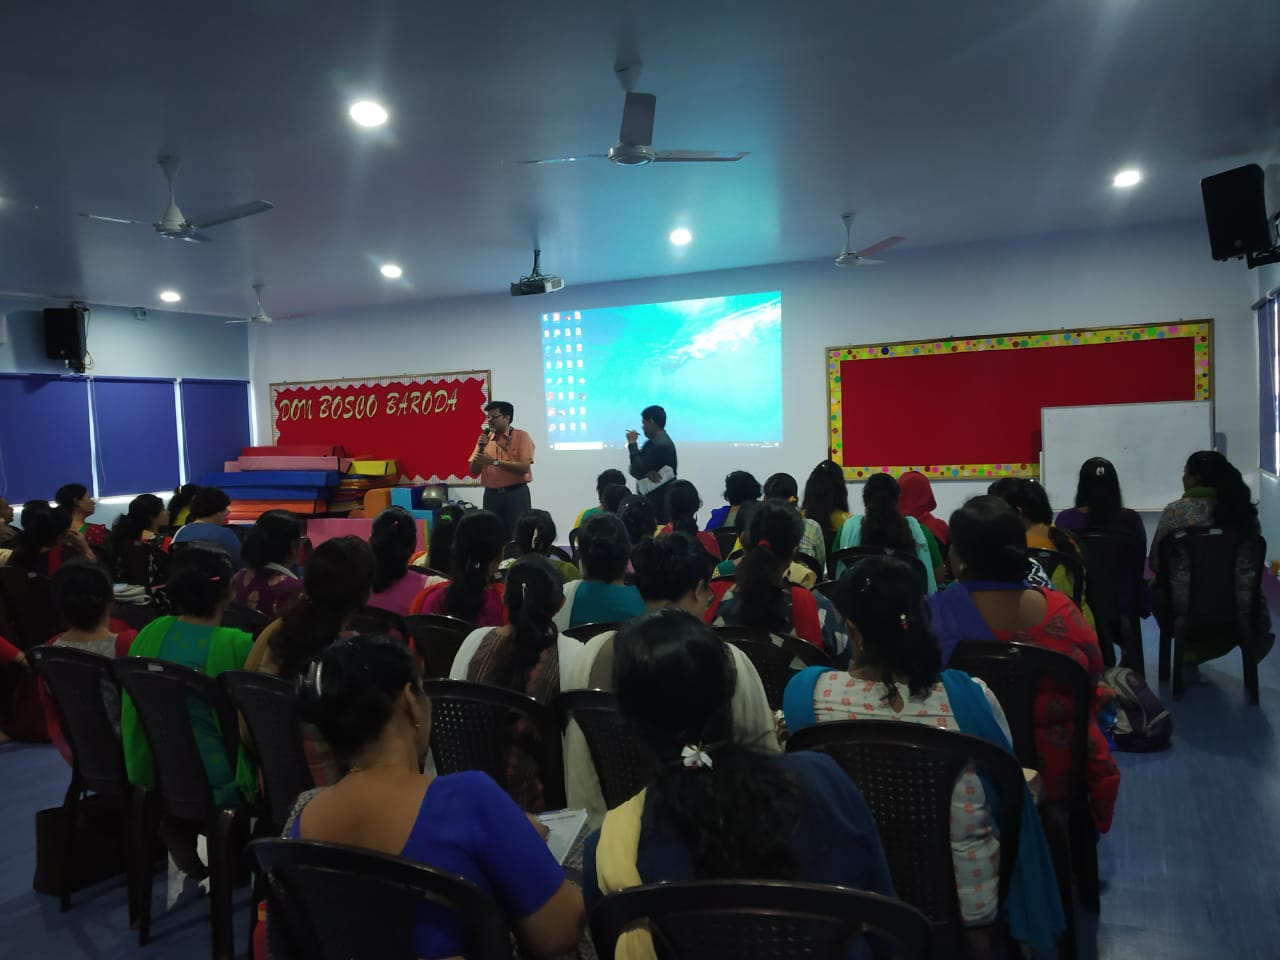 Audio Visual Hall has a good infrastructure with projector and display boards for conducting seminars, workshops and activities.